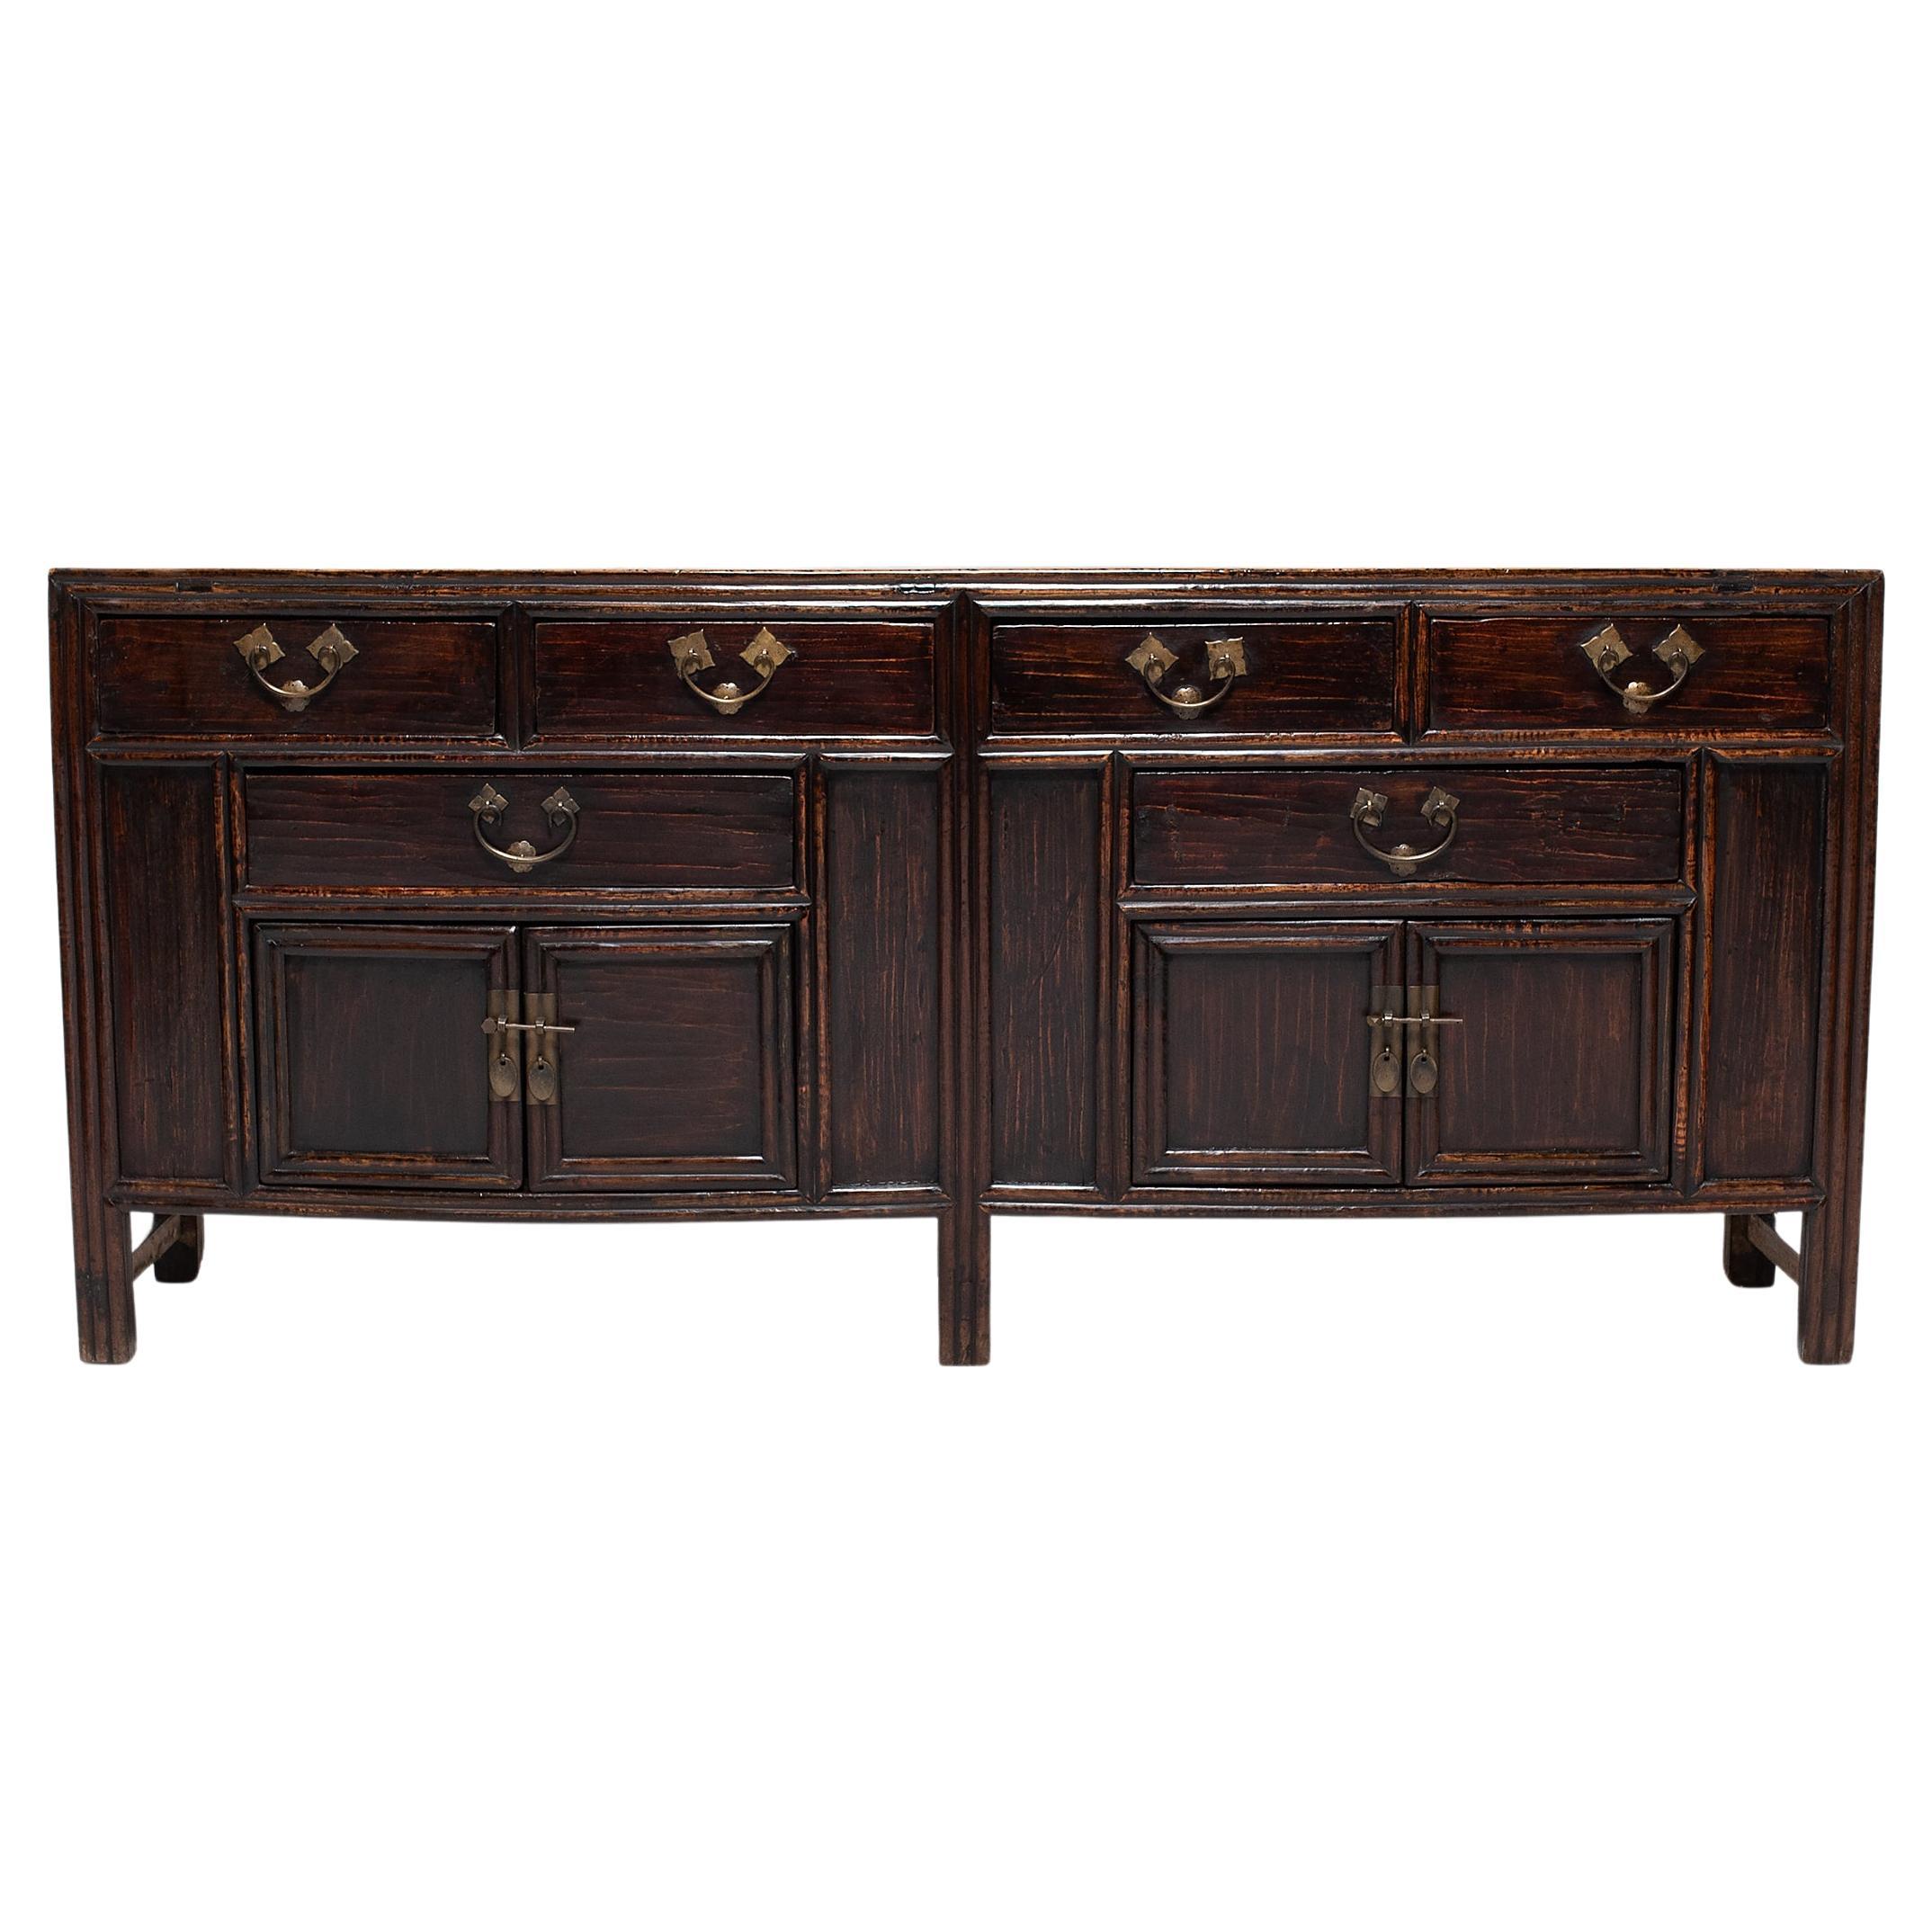 Chinese Six Drawer Coffer Sideboard, c. 1800